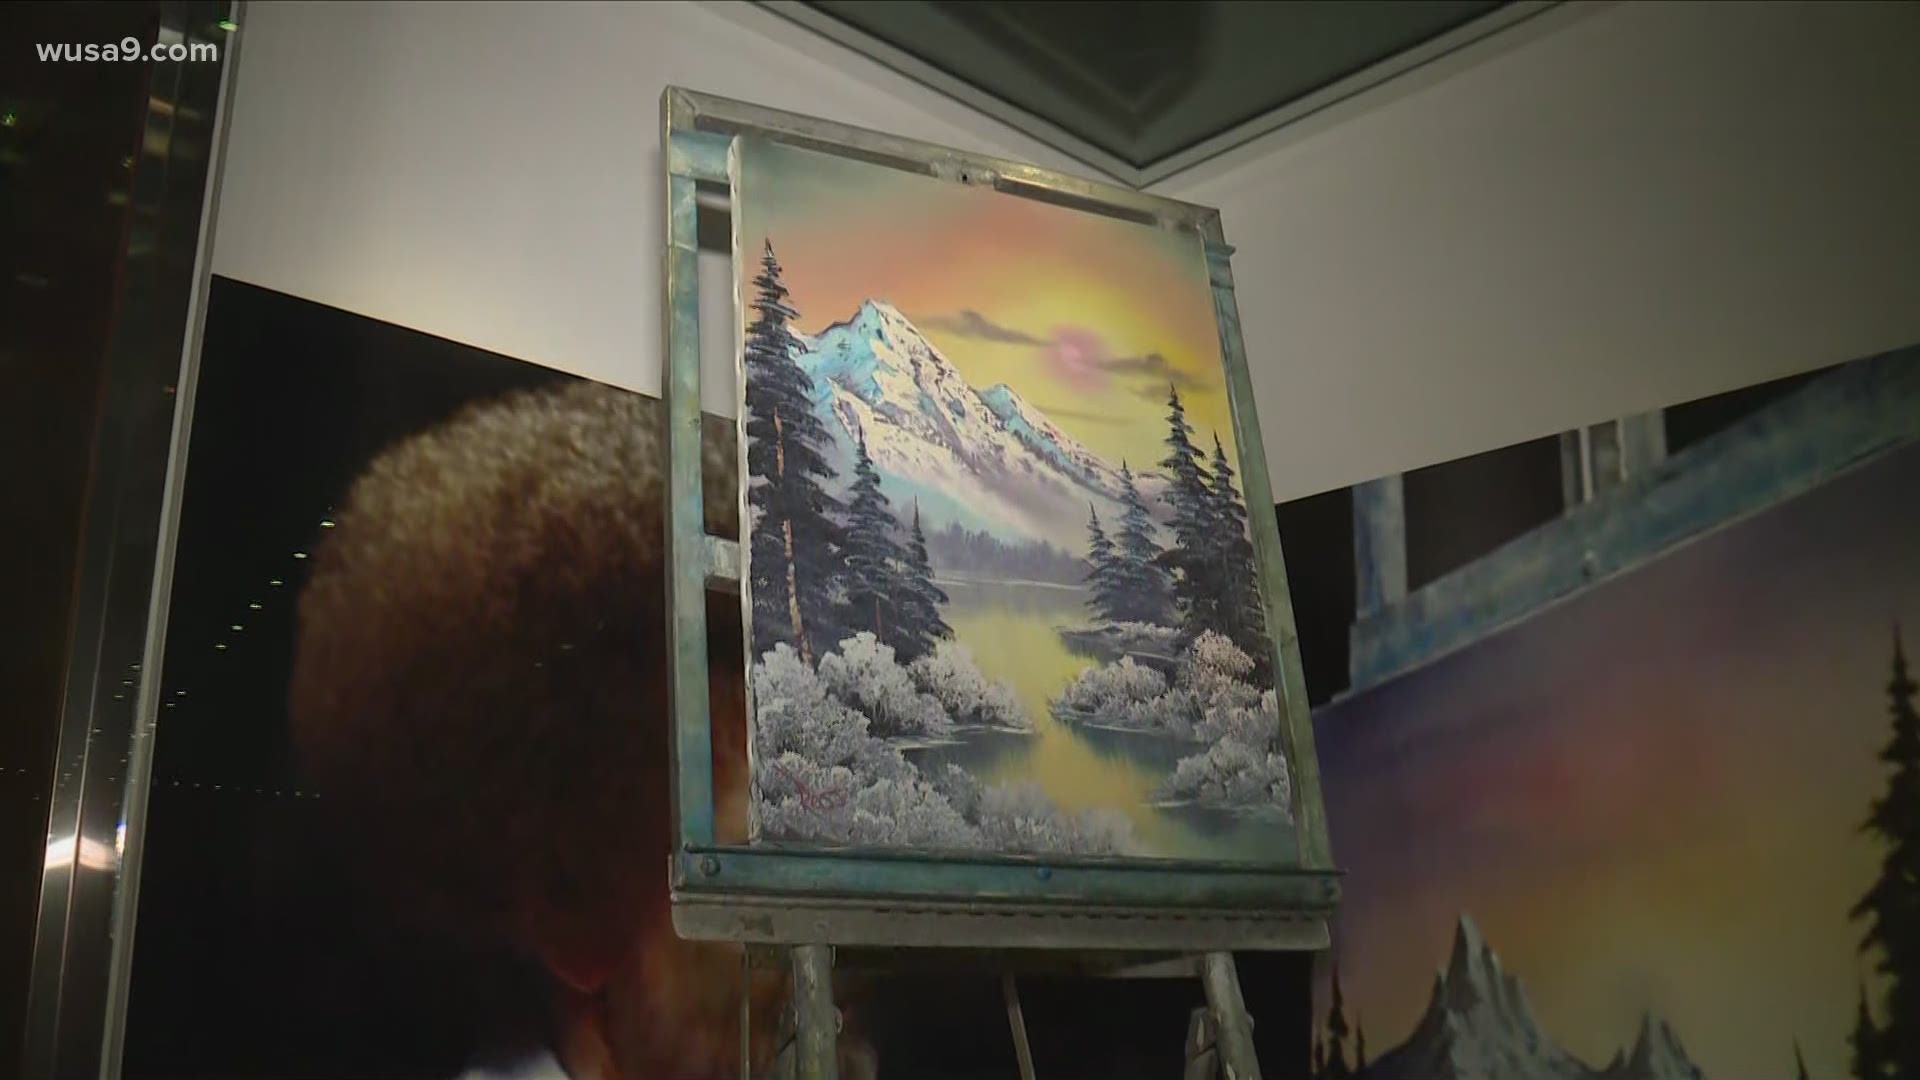 The National Museum of American History reopens with Bob Ross painting on display for the first time.